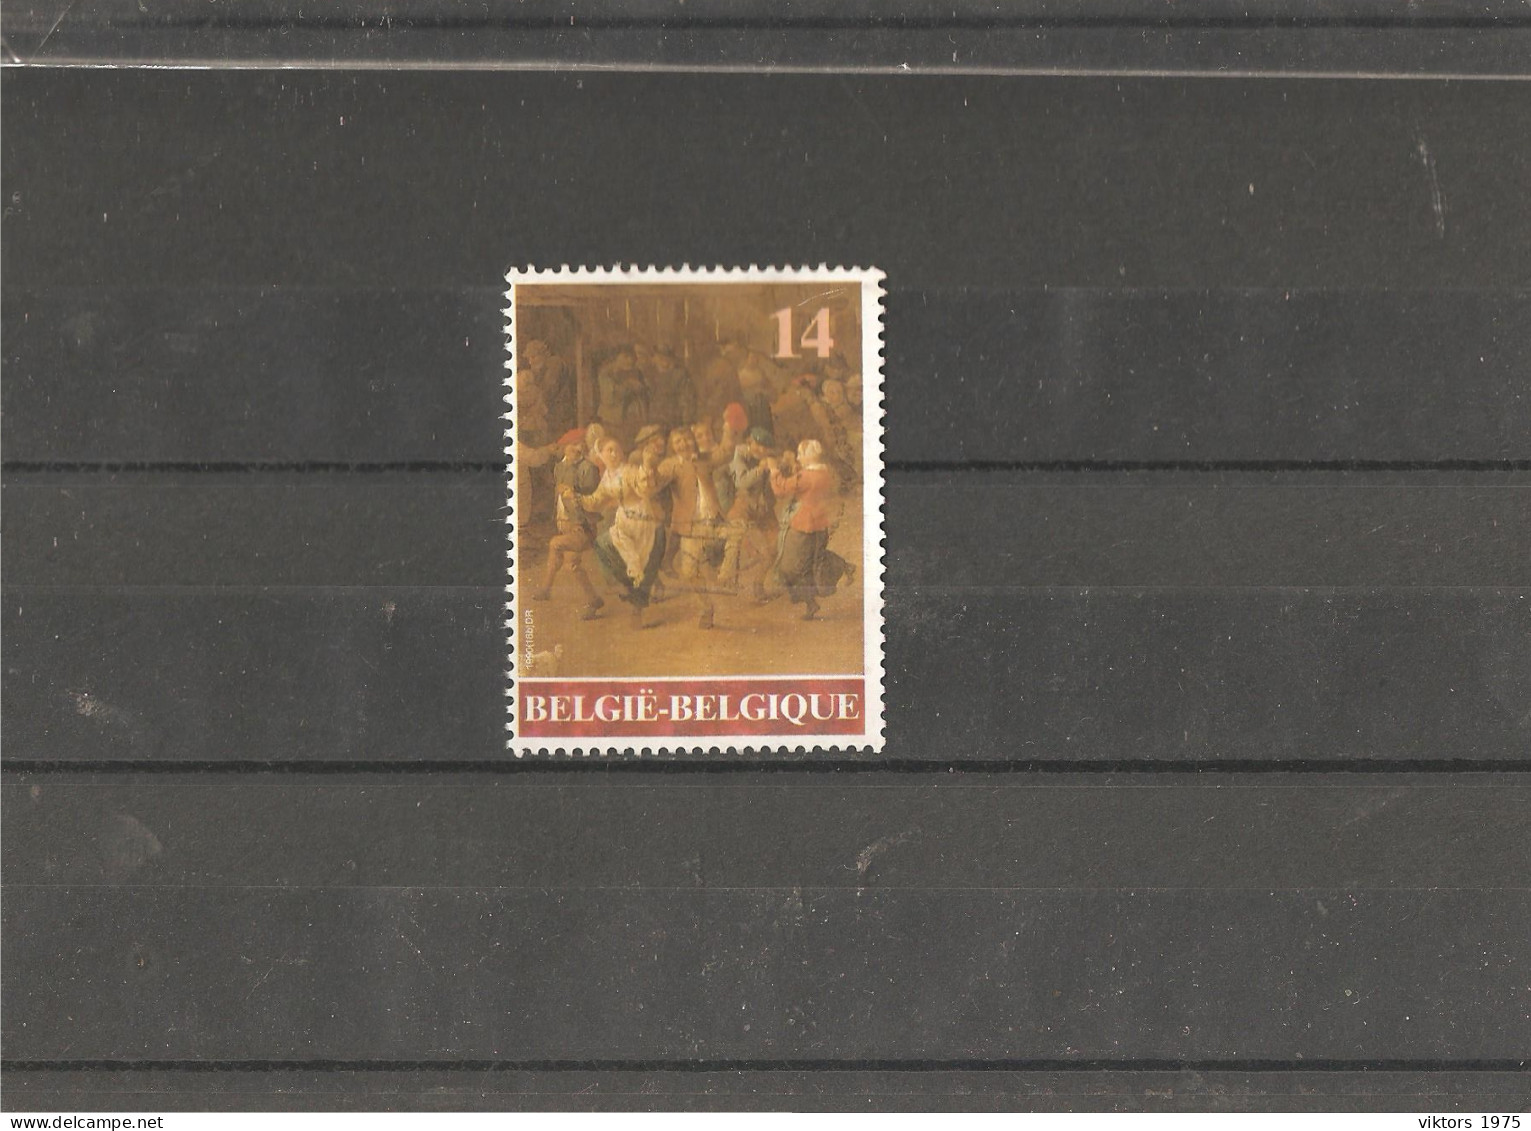 Used Stamp Nr.2446 In MICHEL Catalog - Used Stamps